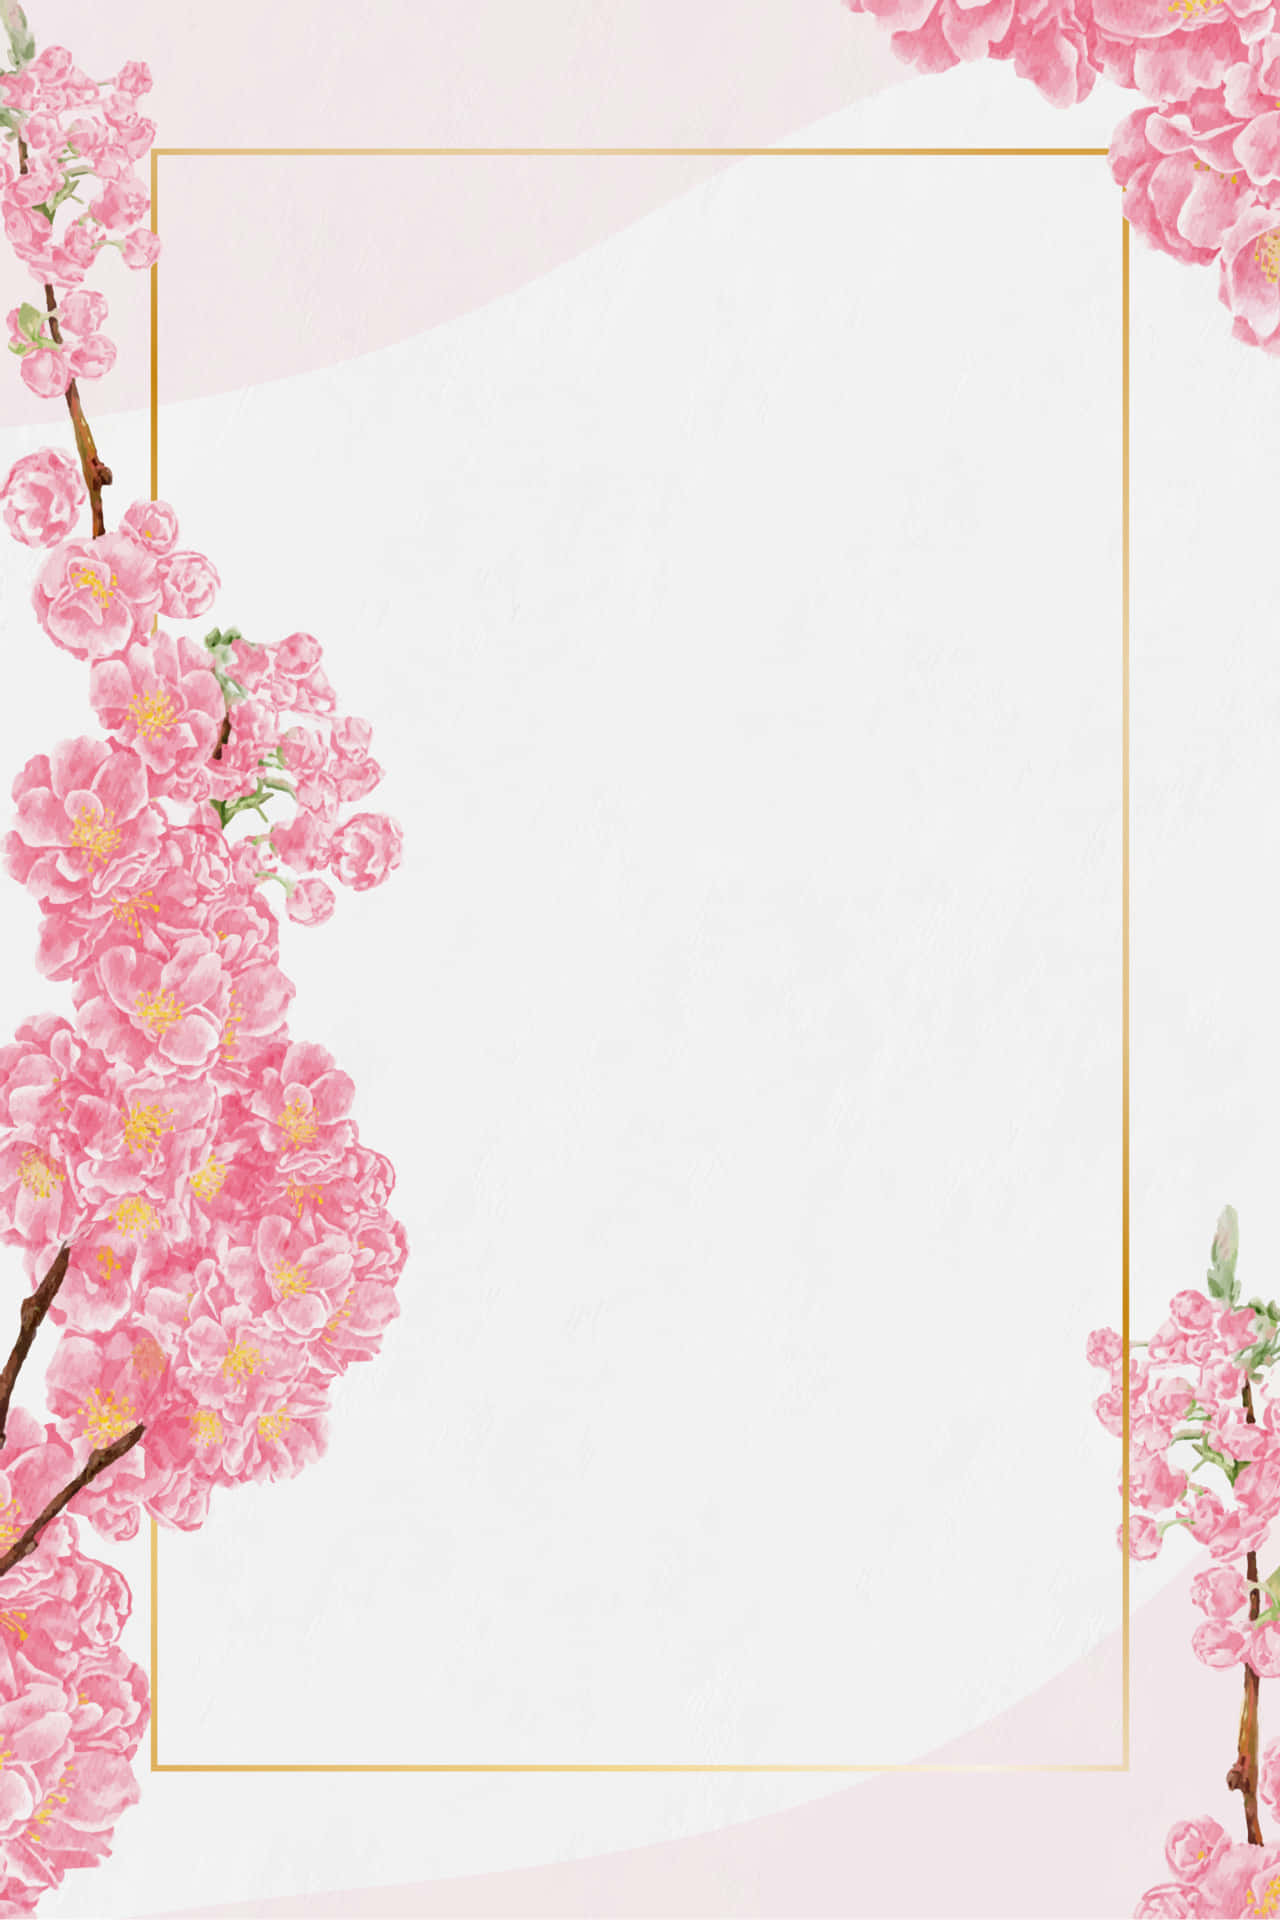 A picturesque view of delicate pink cherry blossom petals. Wallpaper